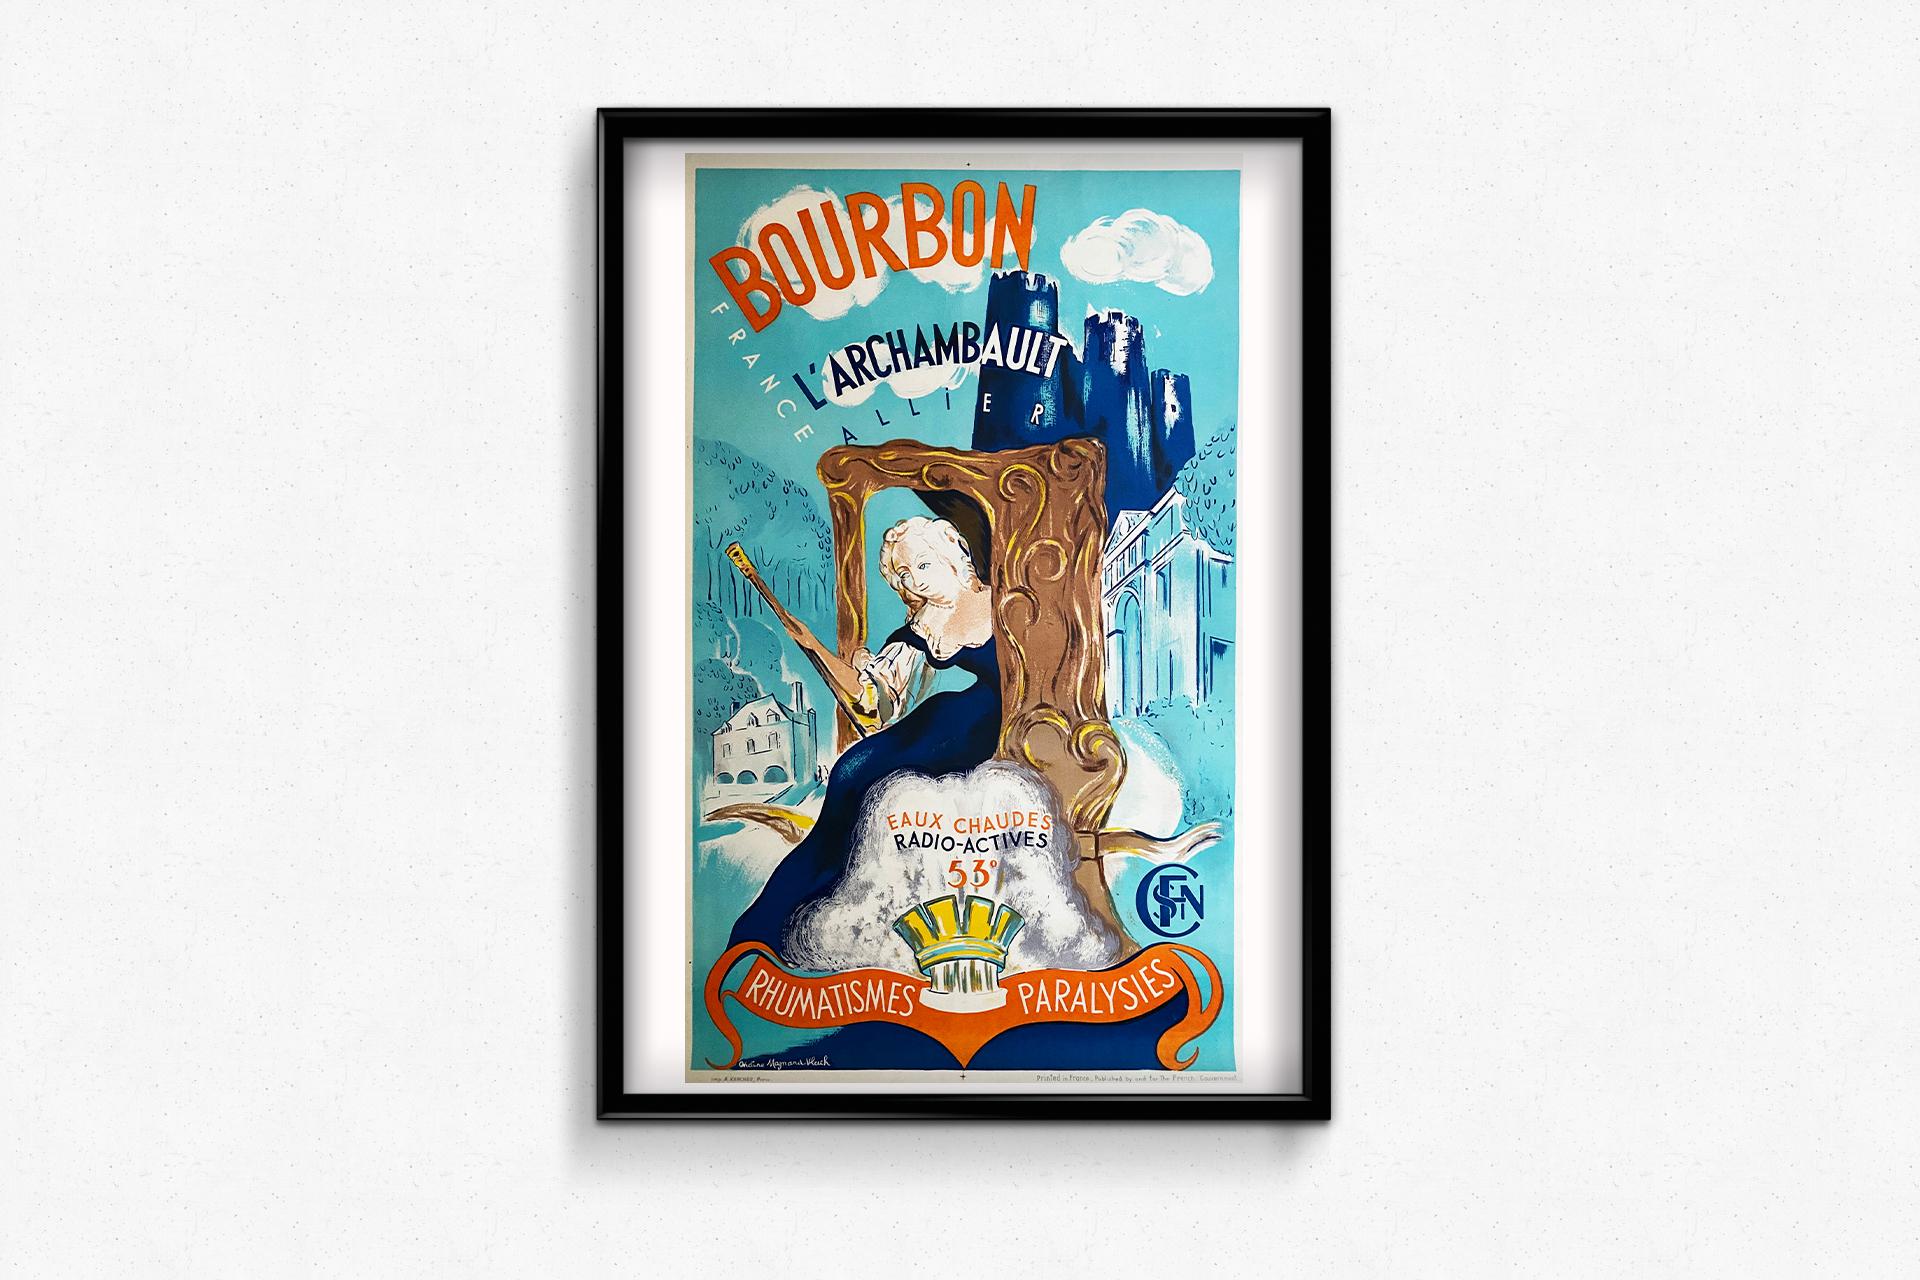 This lovely original poster was created by Ondine Magnard-Vlach 🇫🇷 (1904-1968), a French painter. Her work includes this beautiful poster commissioned by the SNCF in 1937. This original poster promotes Bourbon-L'Archambault, a spa town in the